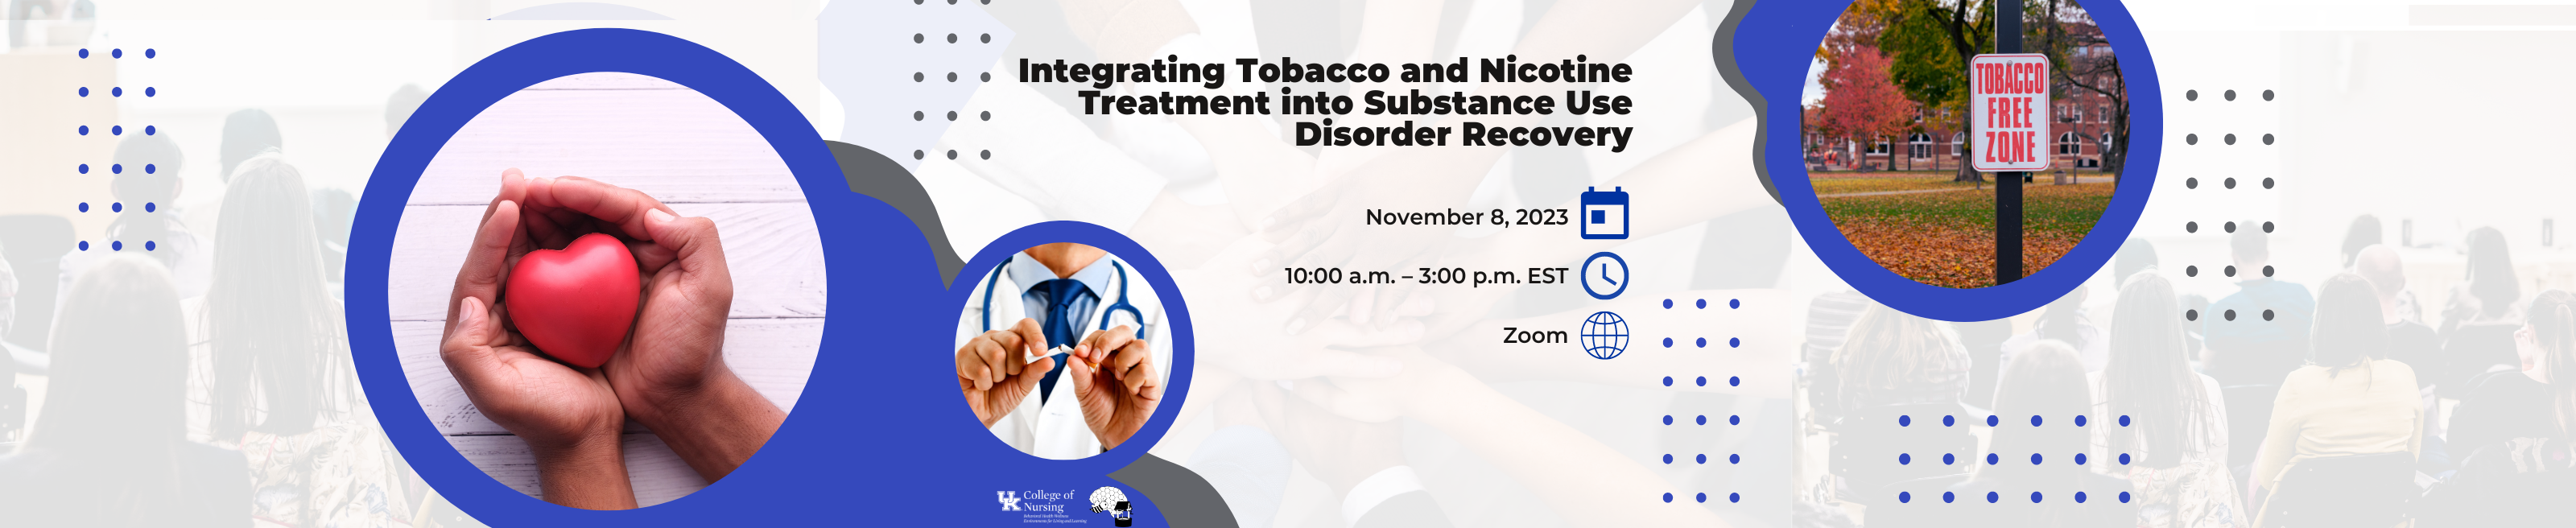 Integrating Tobacco and Nicotine Treatment into Substance Use Disorder Recovery